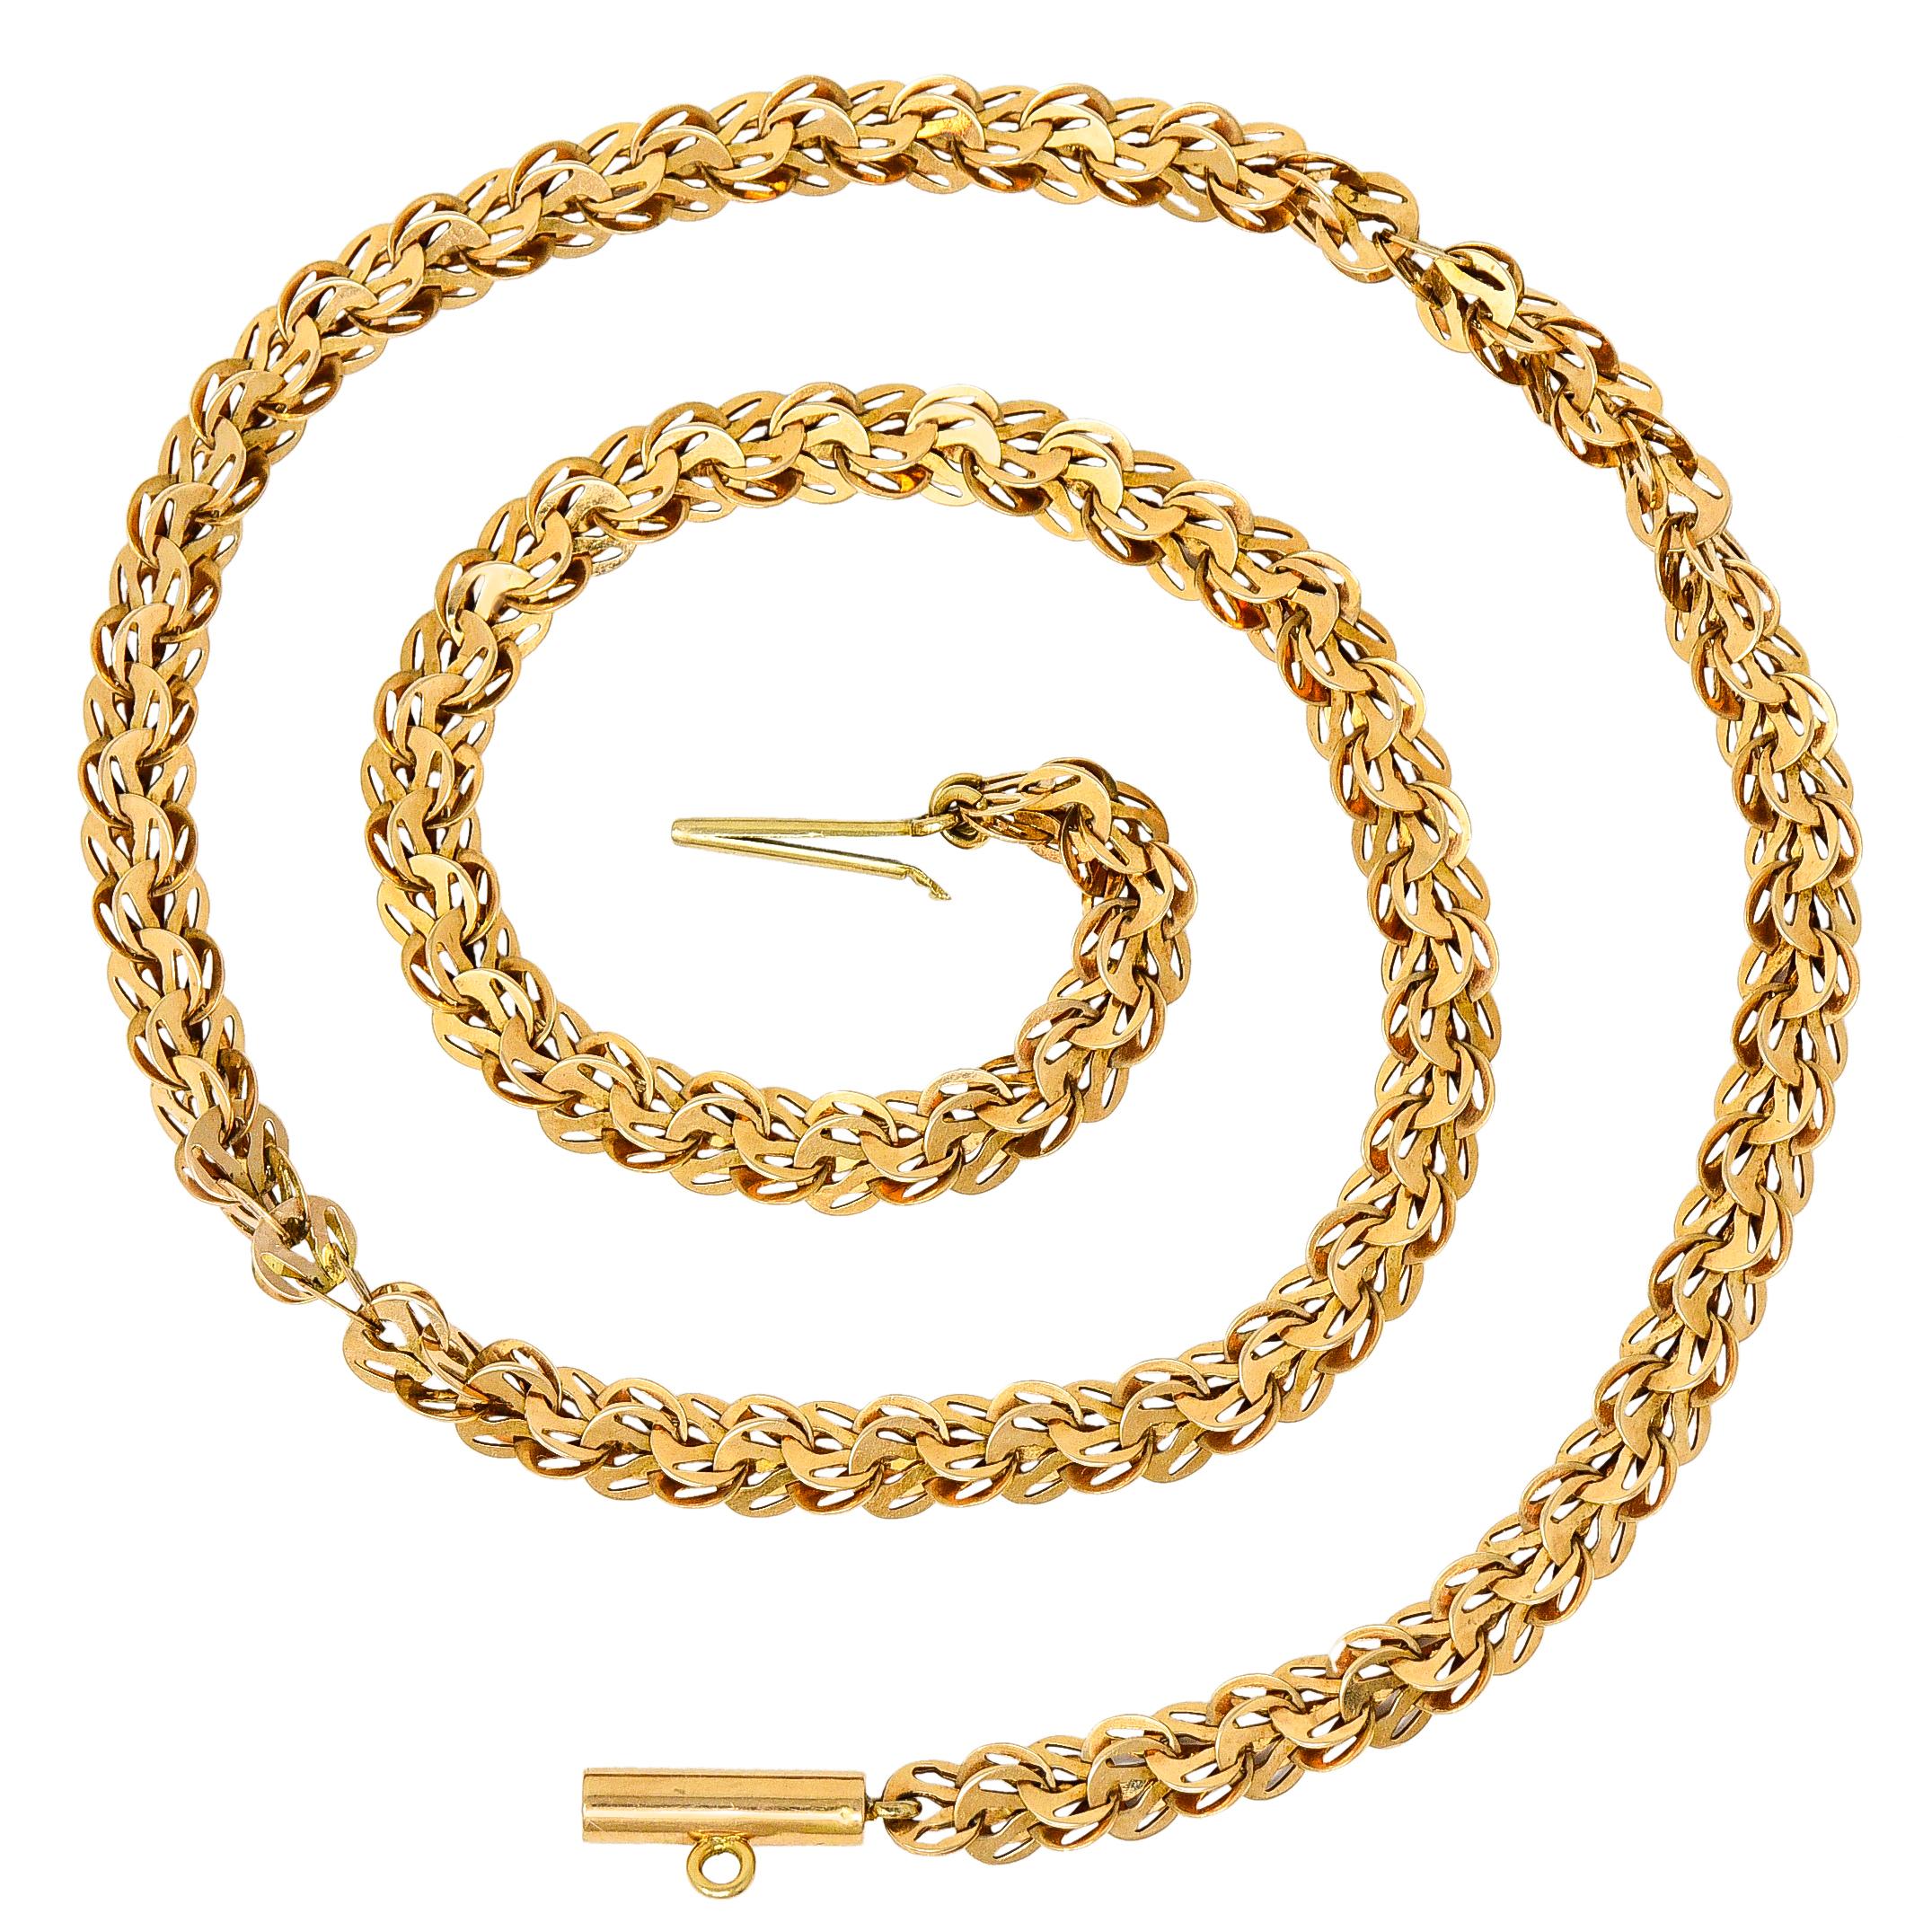 Chain necklace is comprised of pairs of intersecting discoid links

Fancily pierced with a brightly polished finish

Completed by a barrel clasp

Tested as 14 karat gold

Circa: 1900

Length: 19 1/2 inches

Width: 1/4 inch

Total weight: 19.5